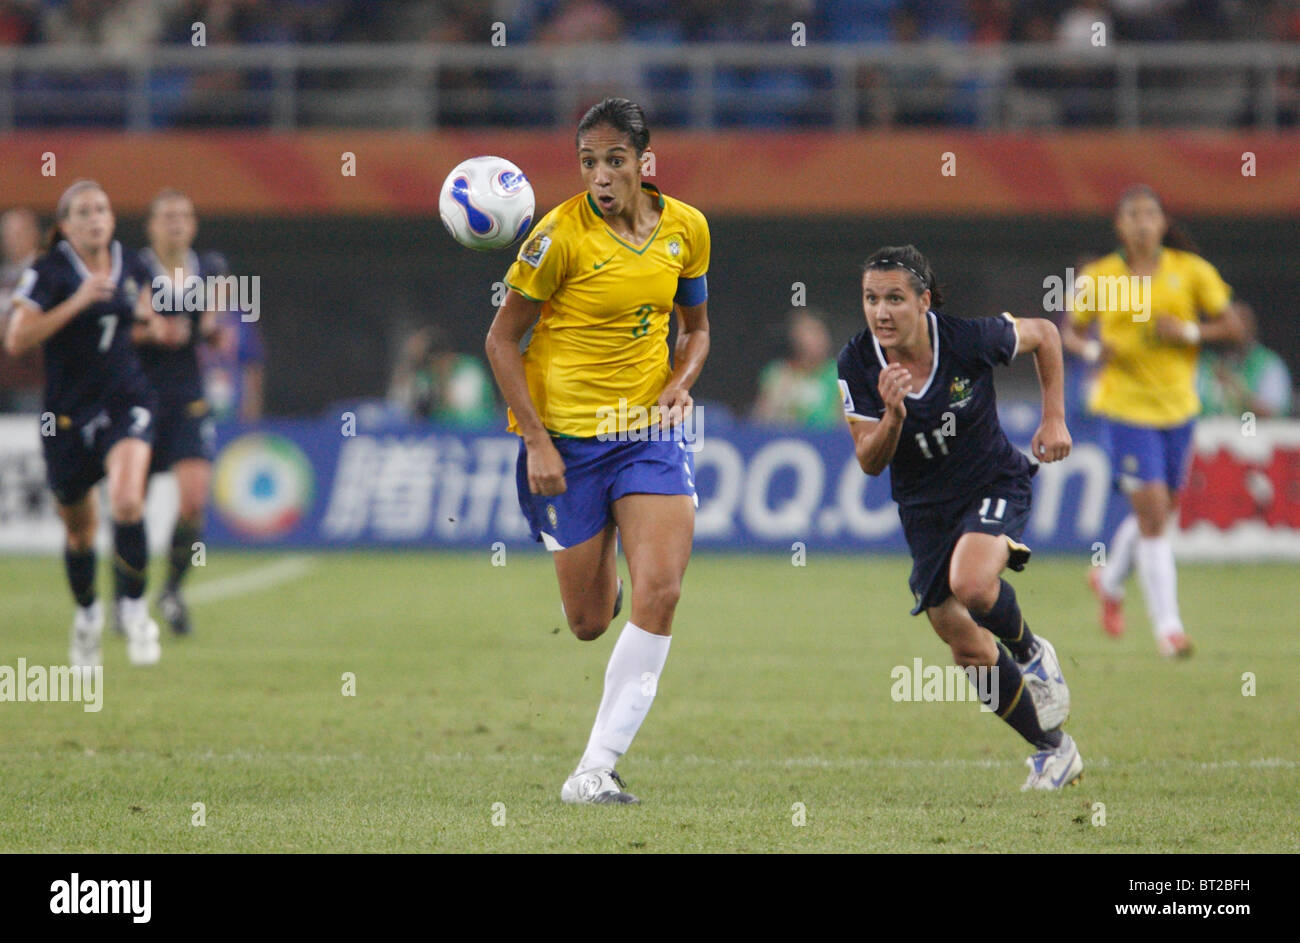 Brazil team captain Aline (3) chases the ball during a 2007 Women's World Cup quarterfinal soccer match against Australia. Stock Photo